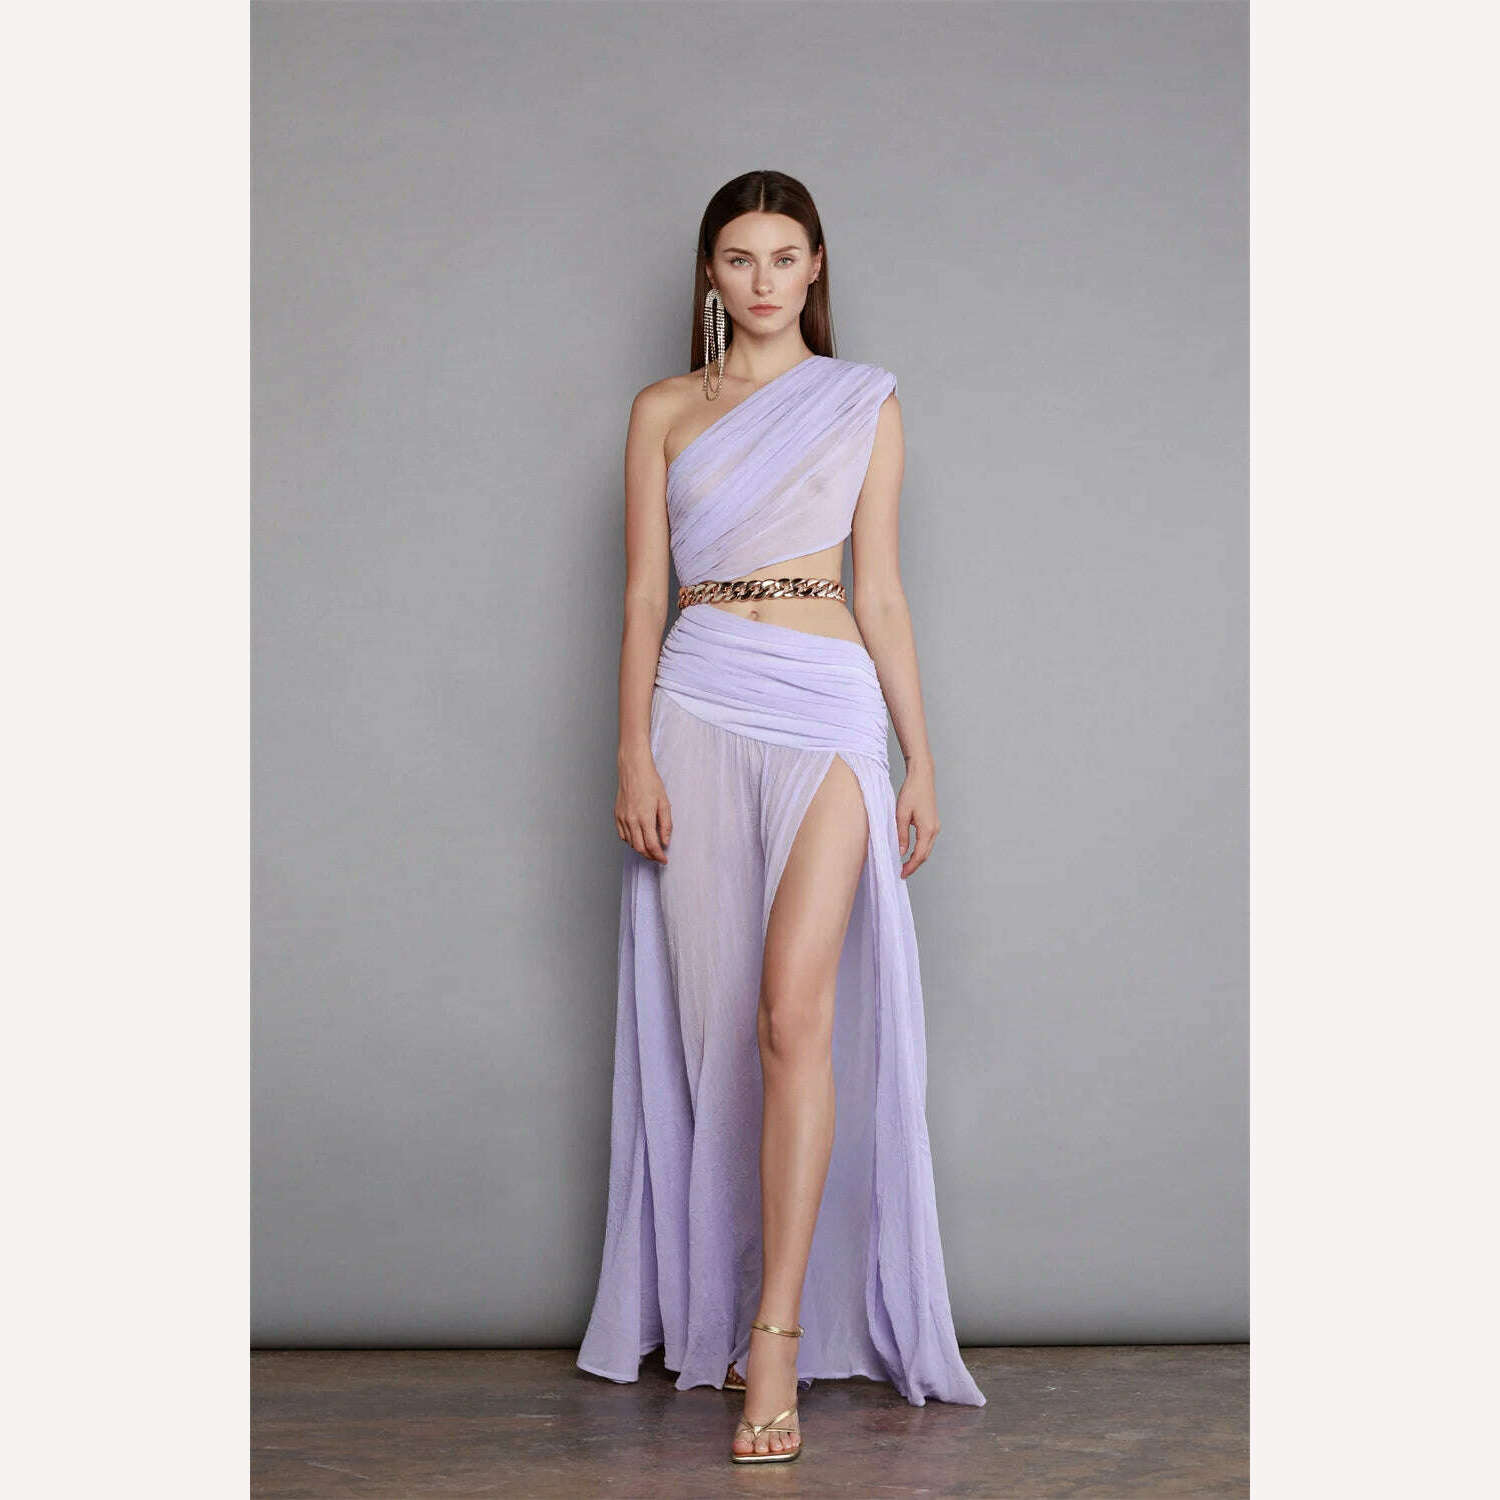 KIMLUD, New Summer Violet Color Sexy One Shoulder Golden Chain EXpose Waist High Split Floor Lenght Dress Celebrity Evening Party Outfit, KIMLUD Womens Clothes